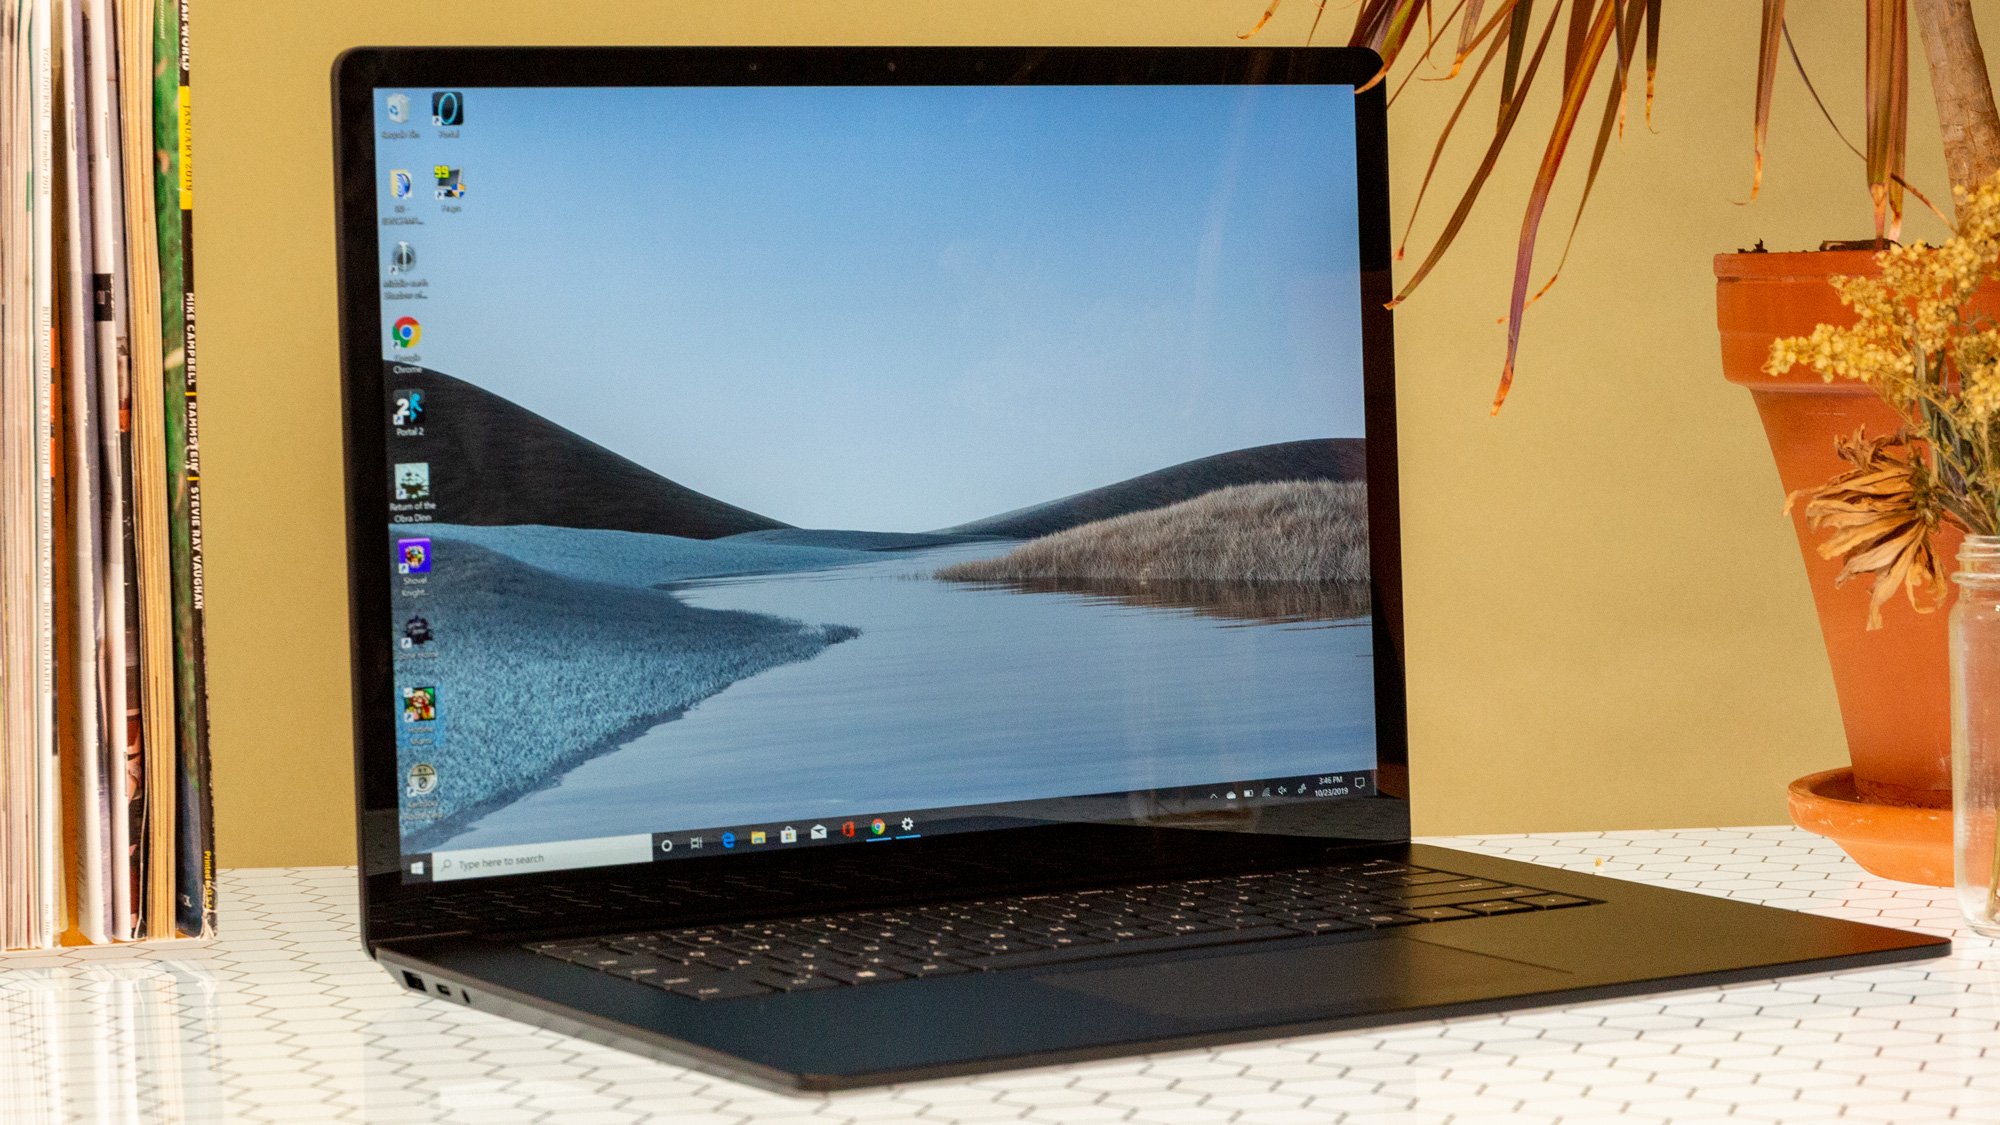 Microsoft Surface Laptop 3's "disappointingly frail" displays – Enkey Magazine